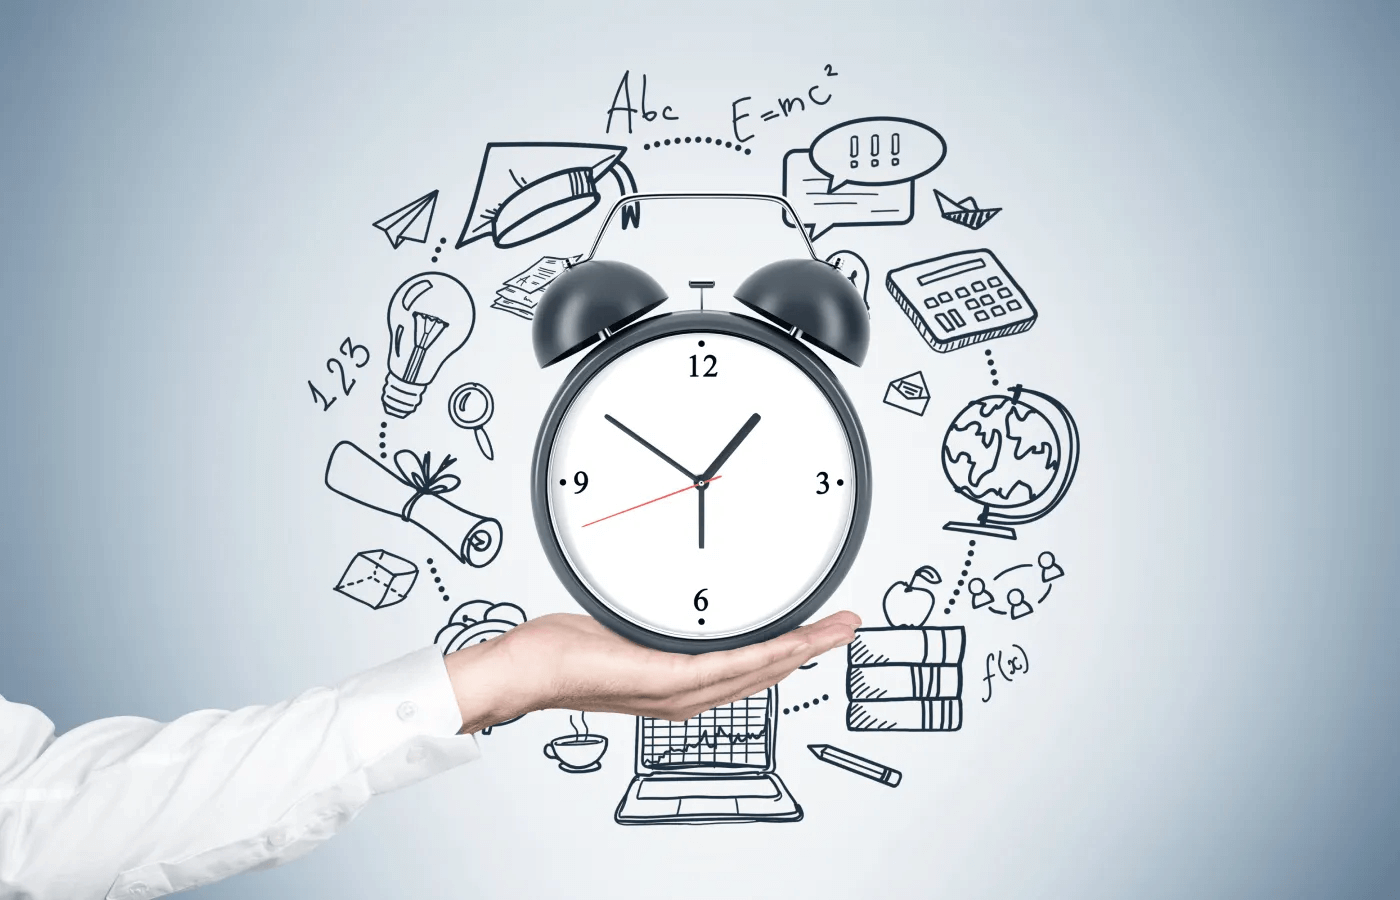  Amazing Tips To Implement An Hour Tracker System At Your Business